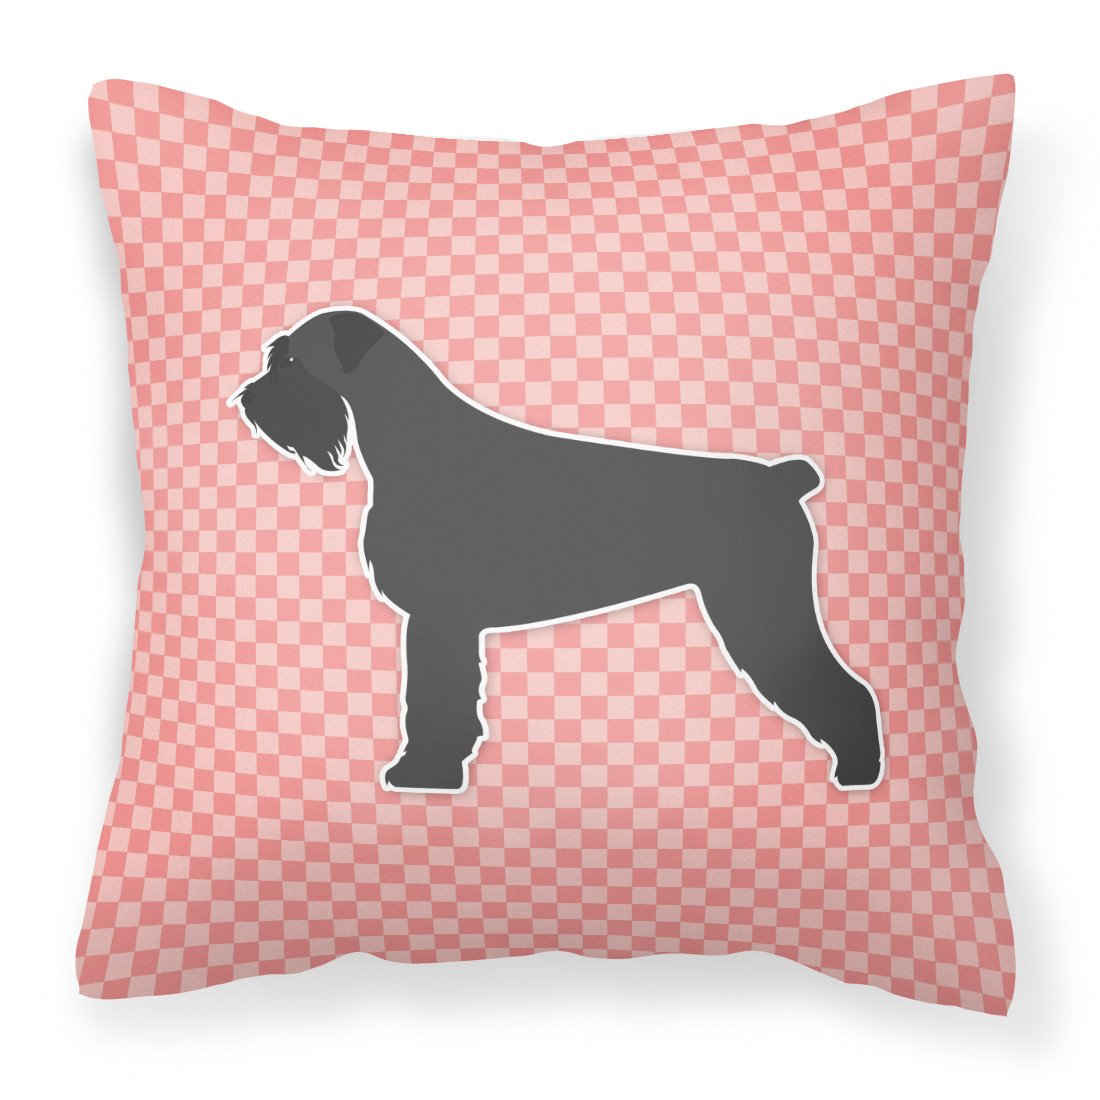 Giant Schnauzer Checkerboard Pink Fabric Decorative Pillow BB3673PW1818 by Caroline's Treasures